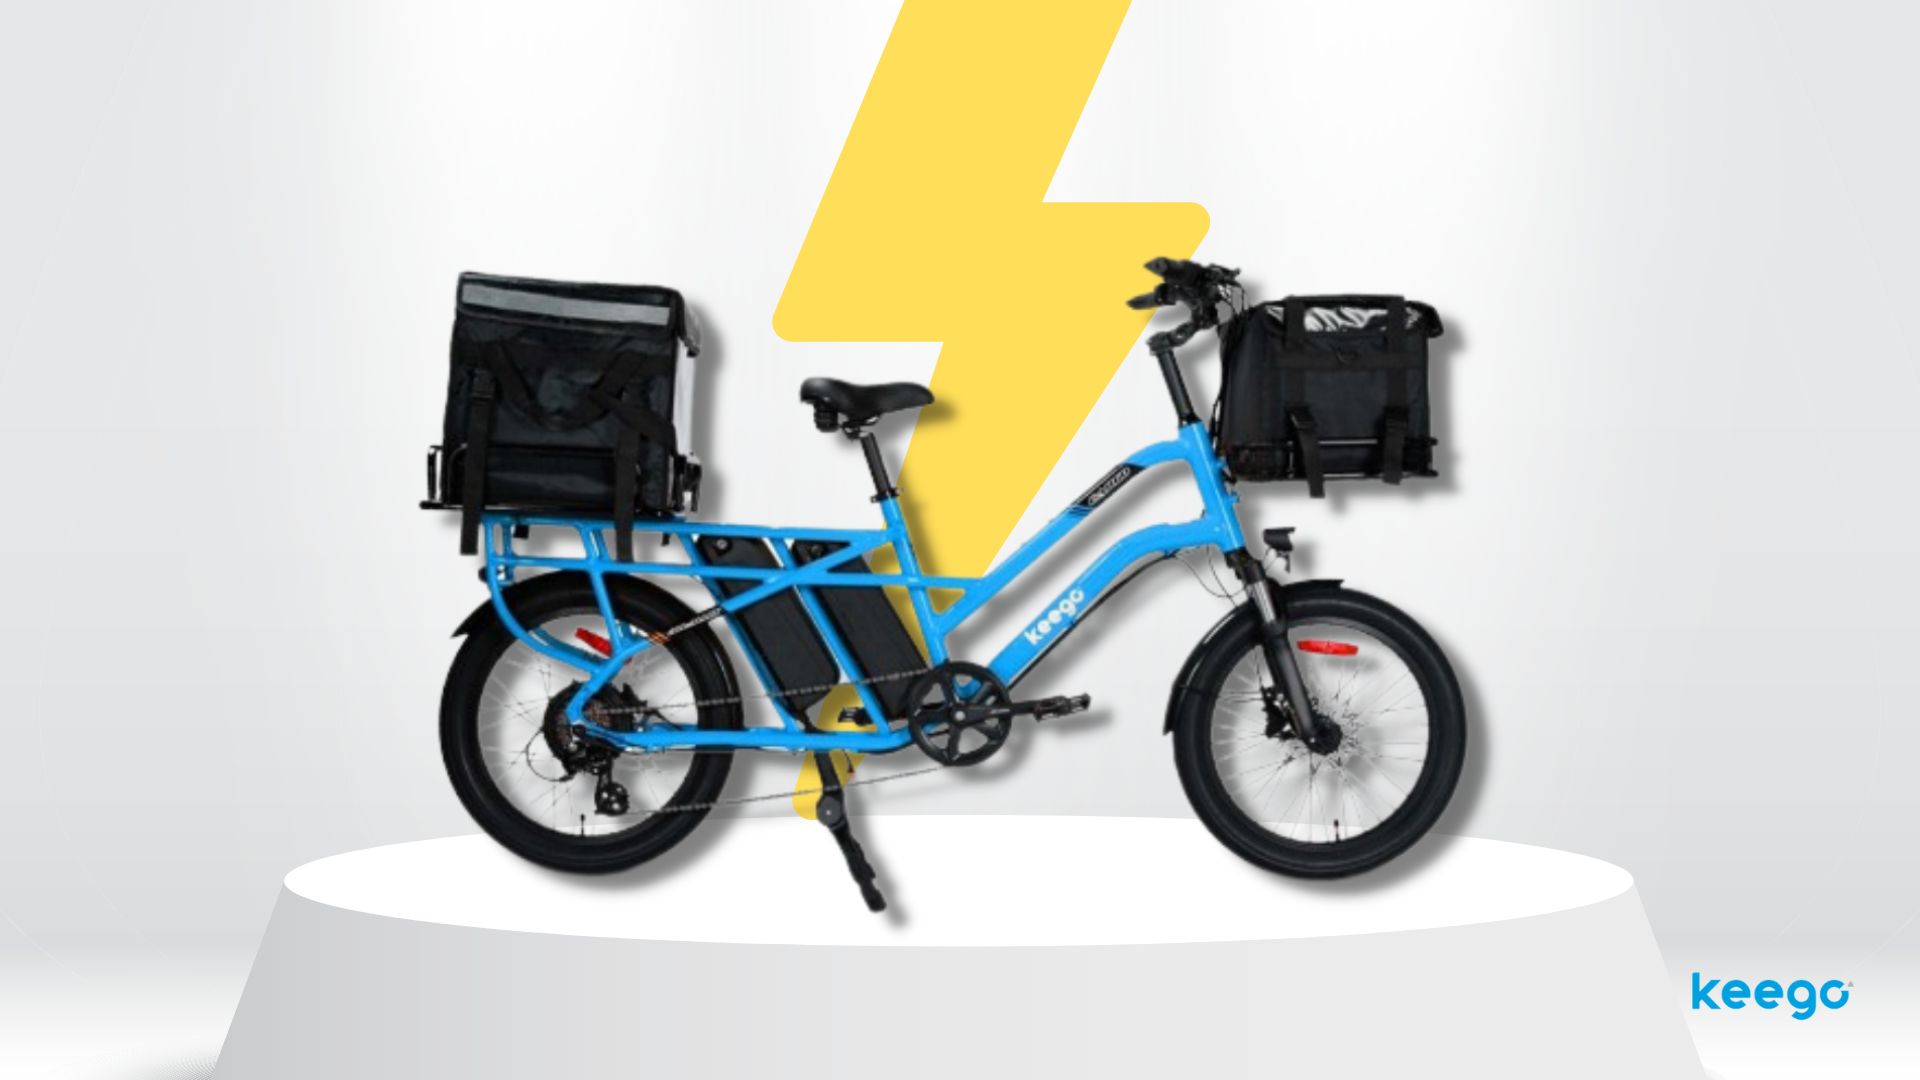 New Product Release: KG4 - An Ebike Built for Delivery - Keego Mobility